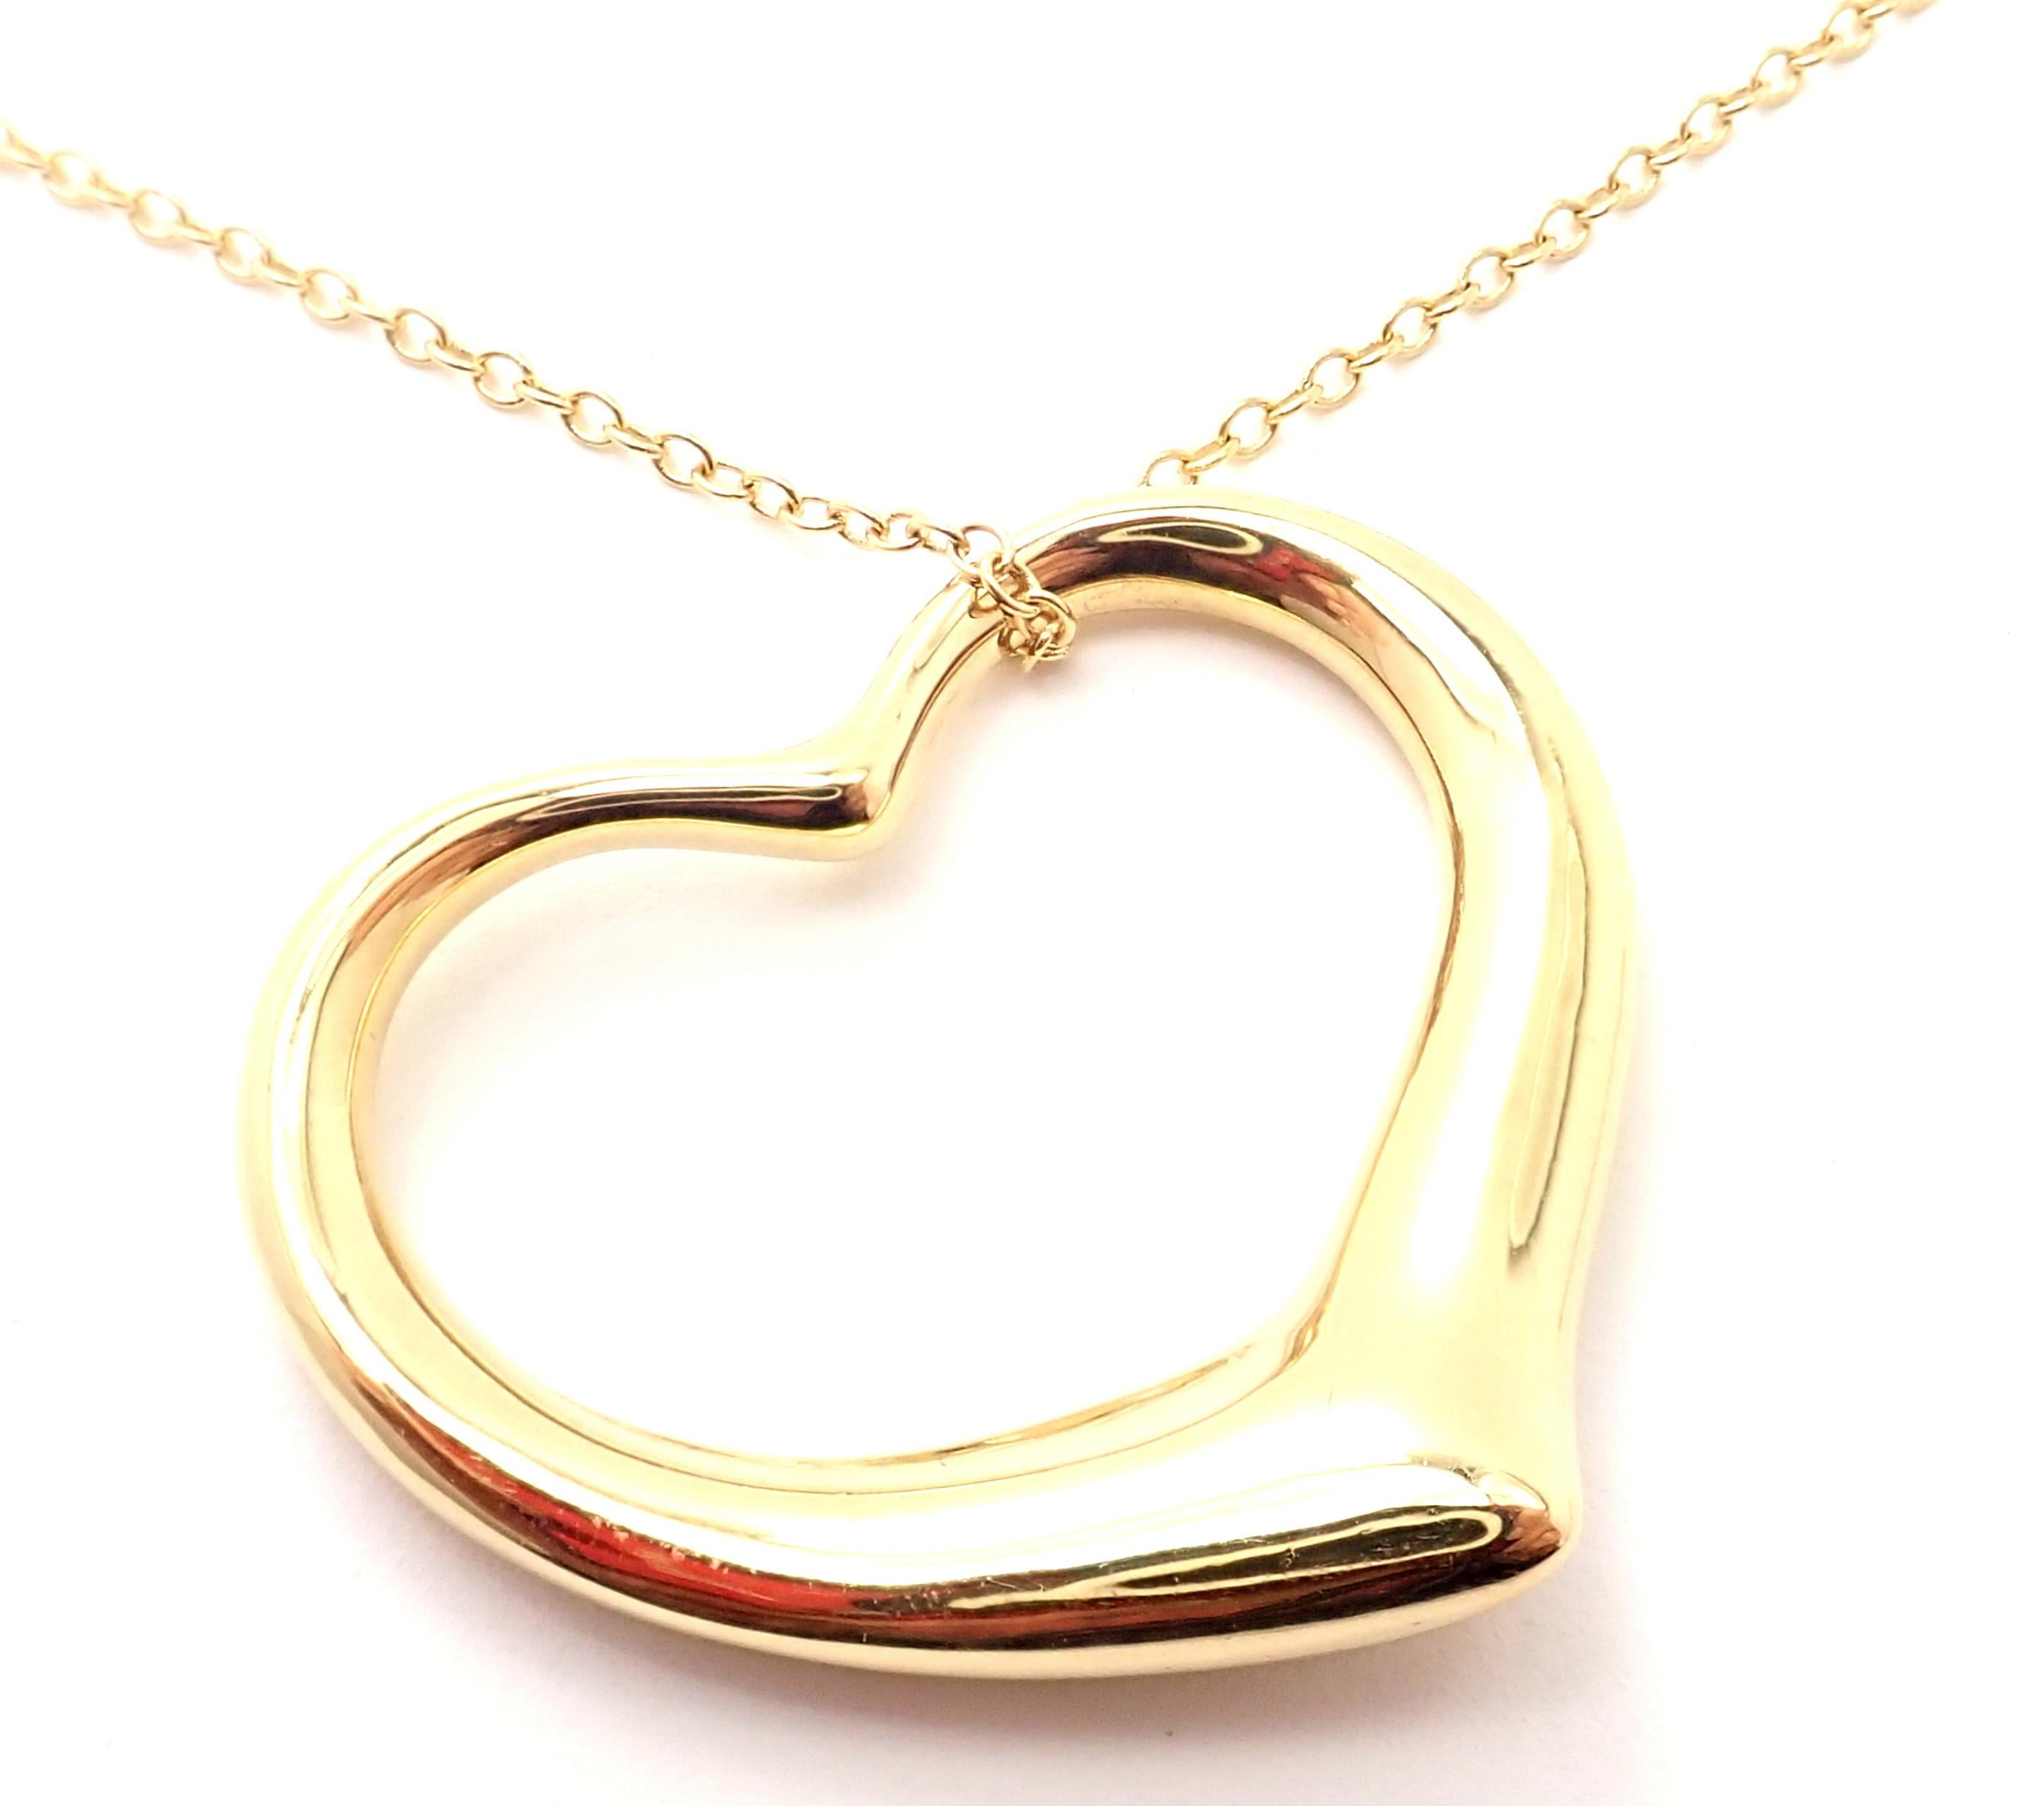 Tiffany & Co. Peretti Extra Large Open Heart Yellow Gold Pendant Necklace For Sale 2